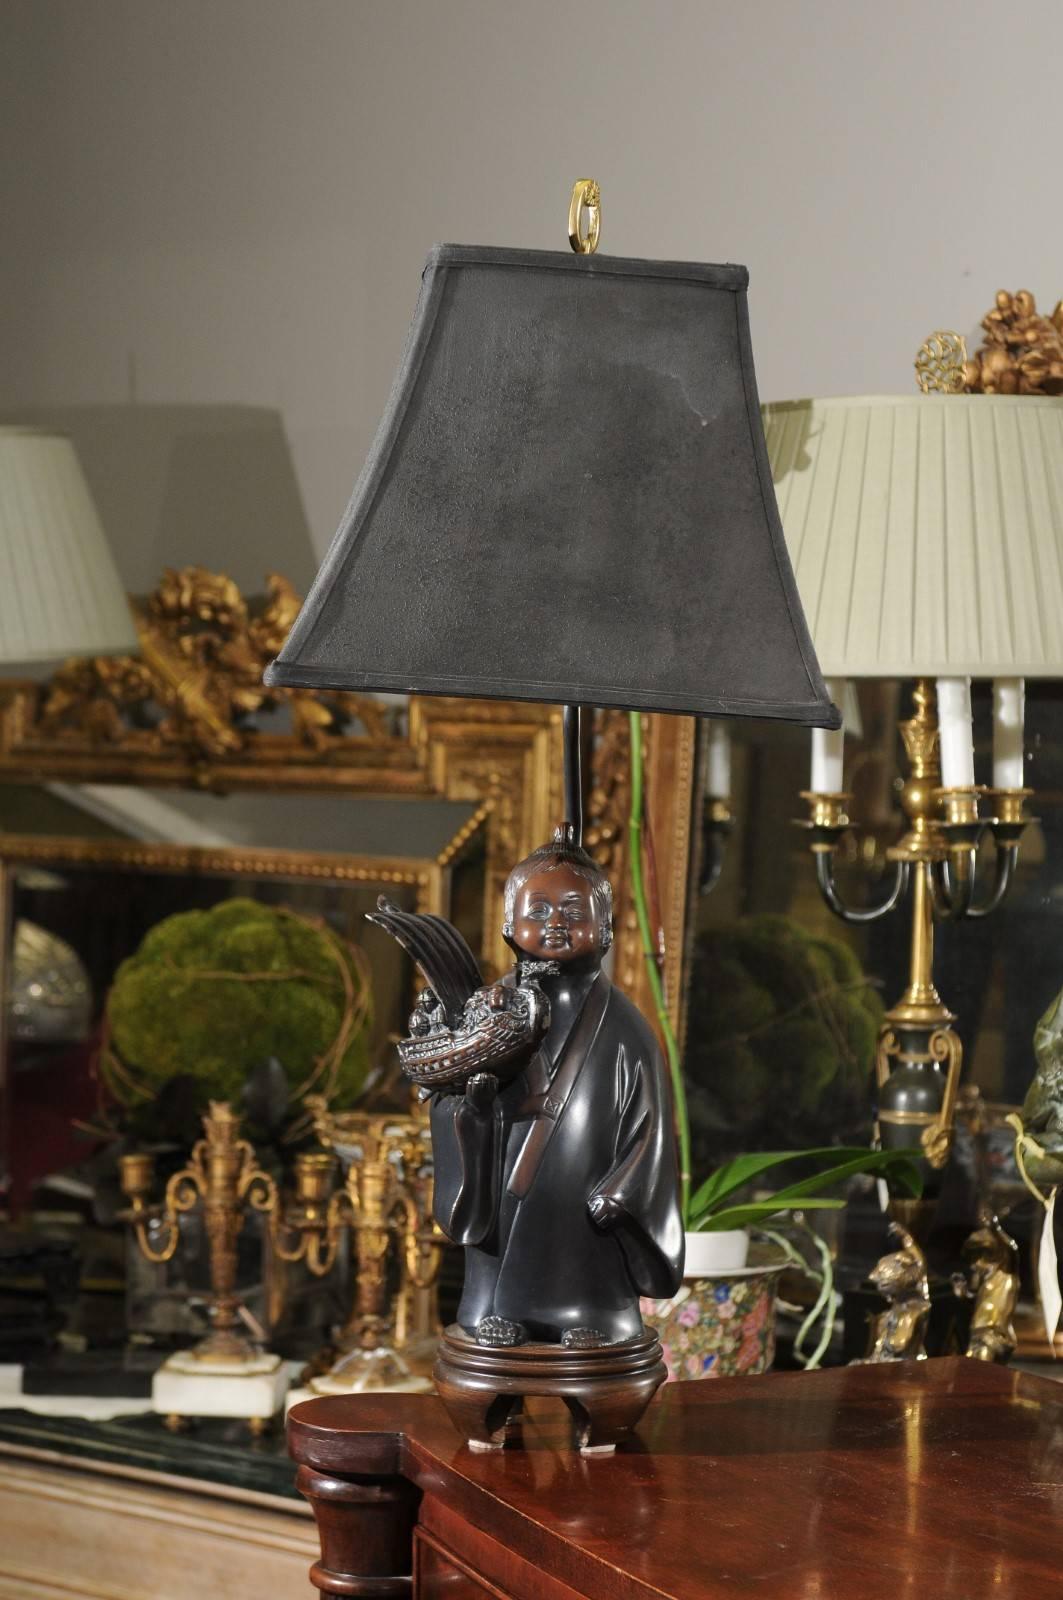 A handsome lamp with a Chinese figure holding a dragon boat mounted to a wooden base. The actual figure in 12 1/2 in. tall and the lamp is 29 in. to the finial.
The black parchment shade is 12 1/2 in. W x 10 1/4 in. H.